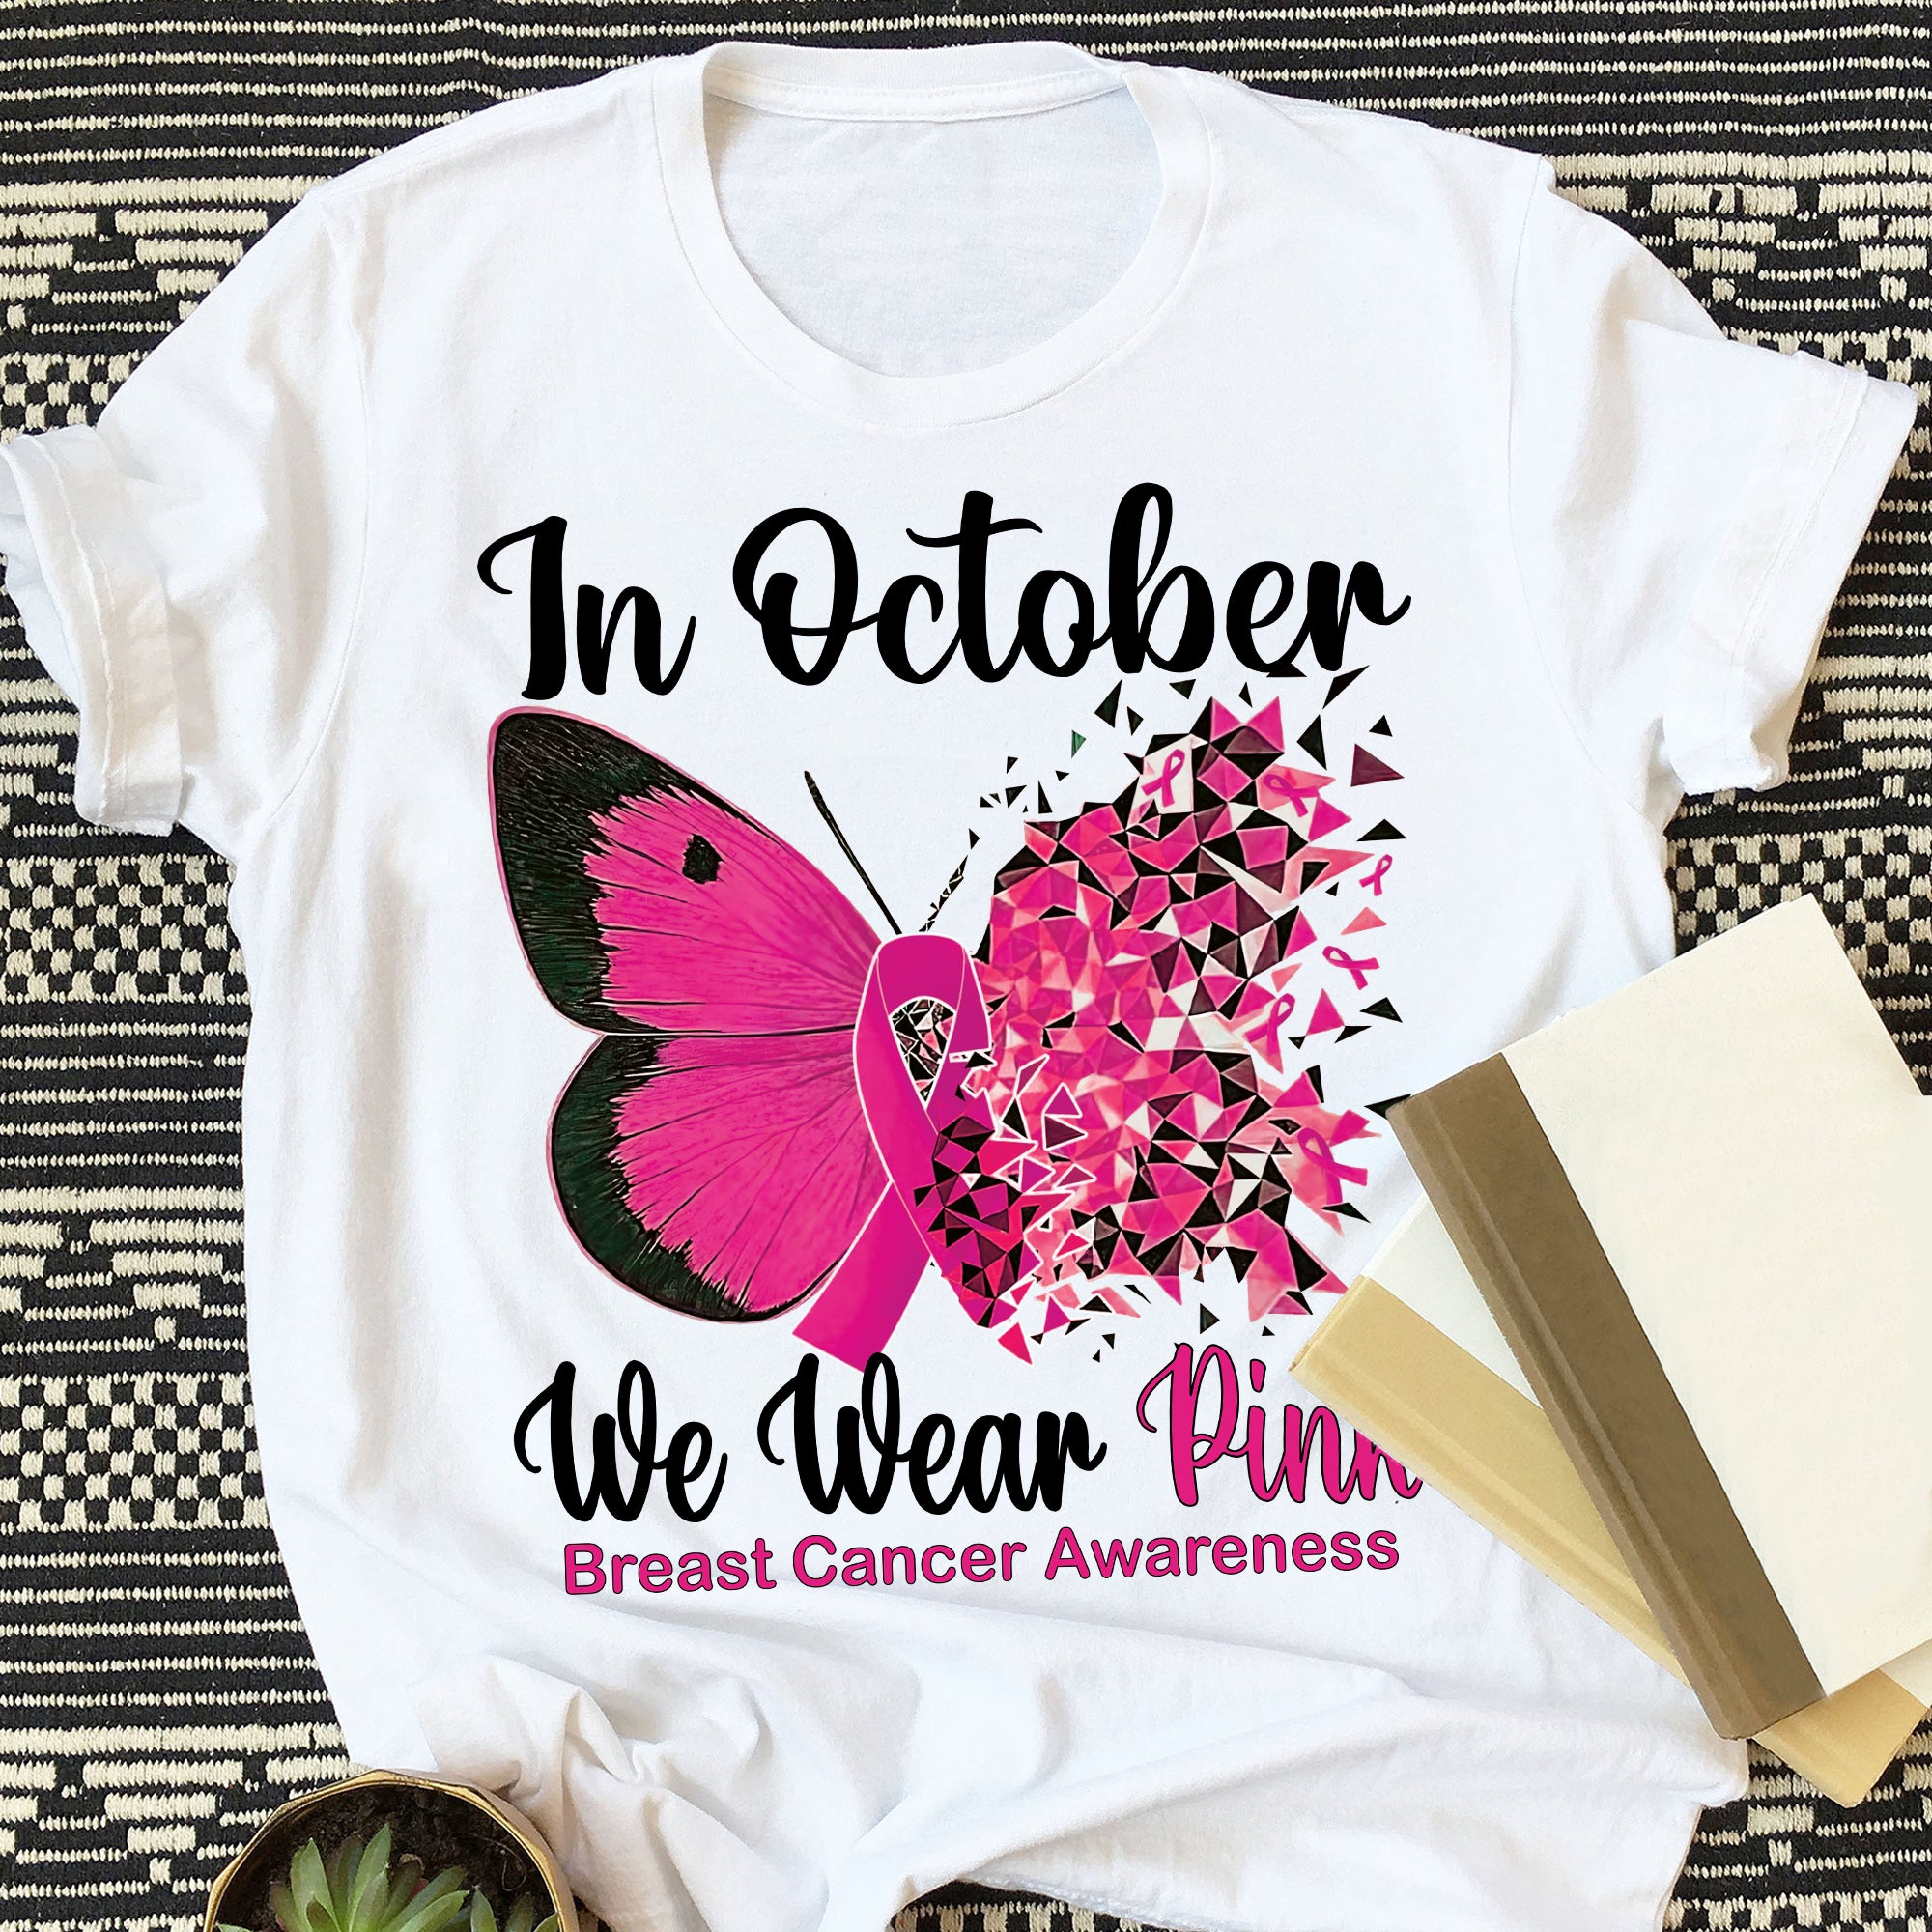 IN OCTOBER WE WEAR PINK T-SHIRT